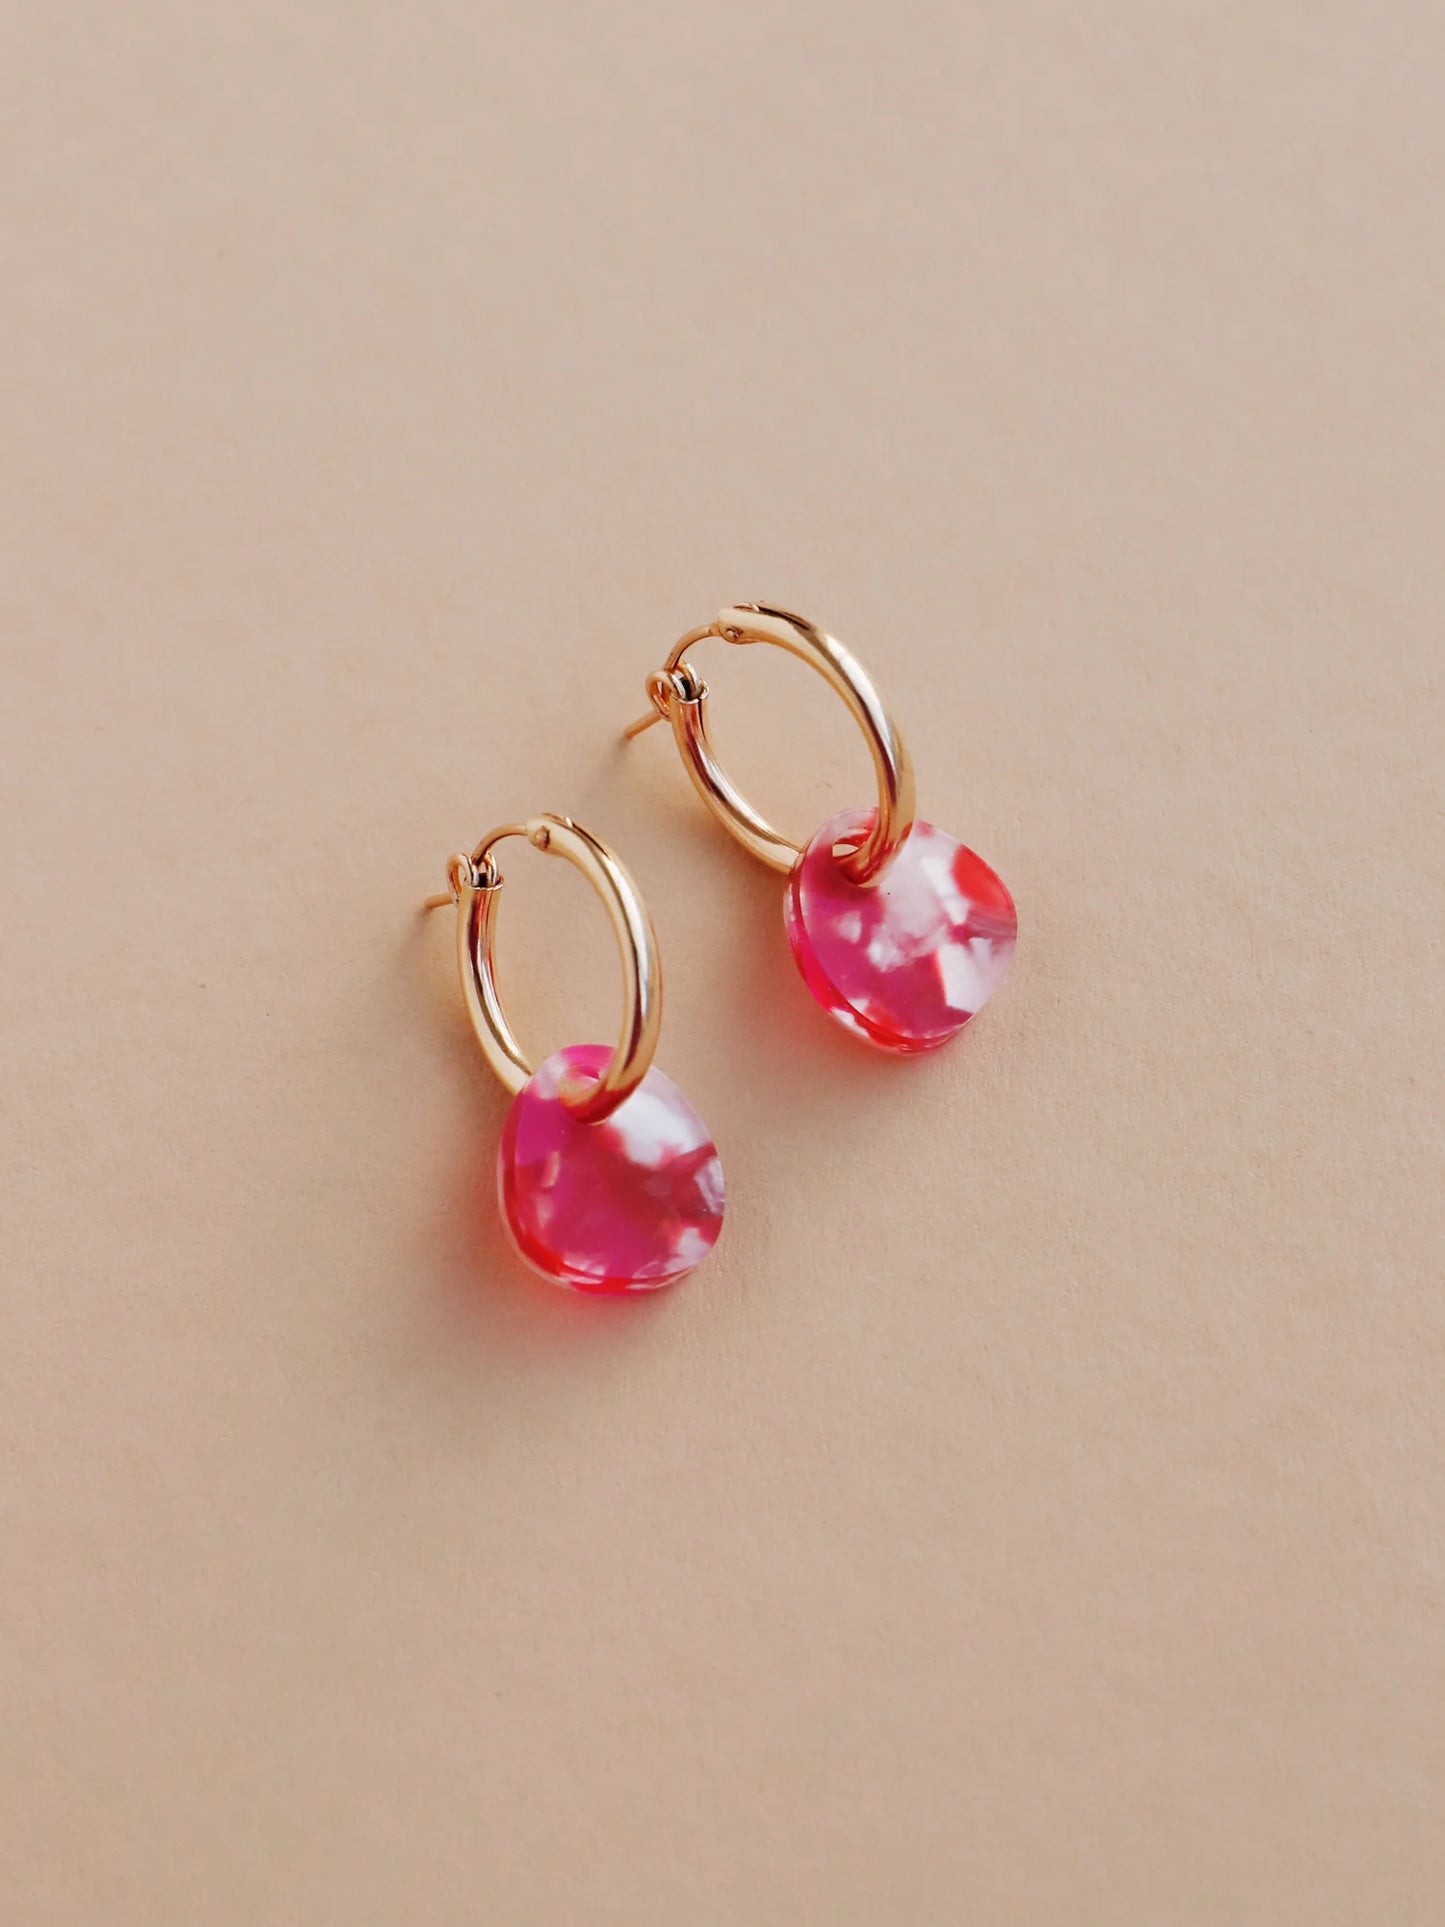 The Every Space Beatrice hoop earrings in filled gold and raspberry acrylic by Wolf & Moon